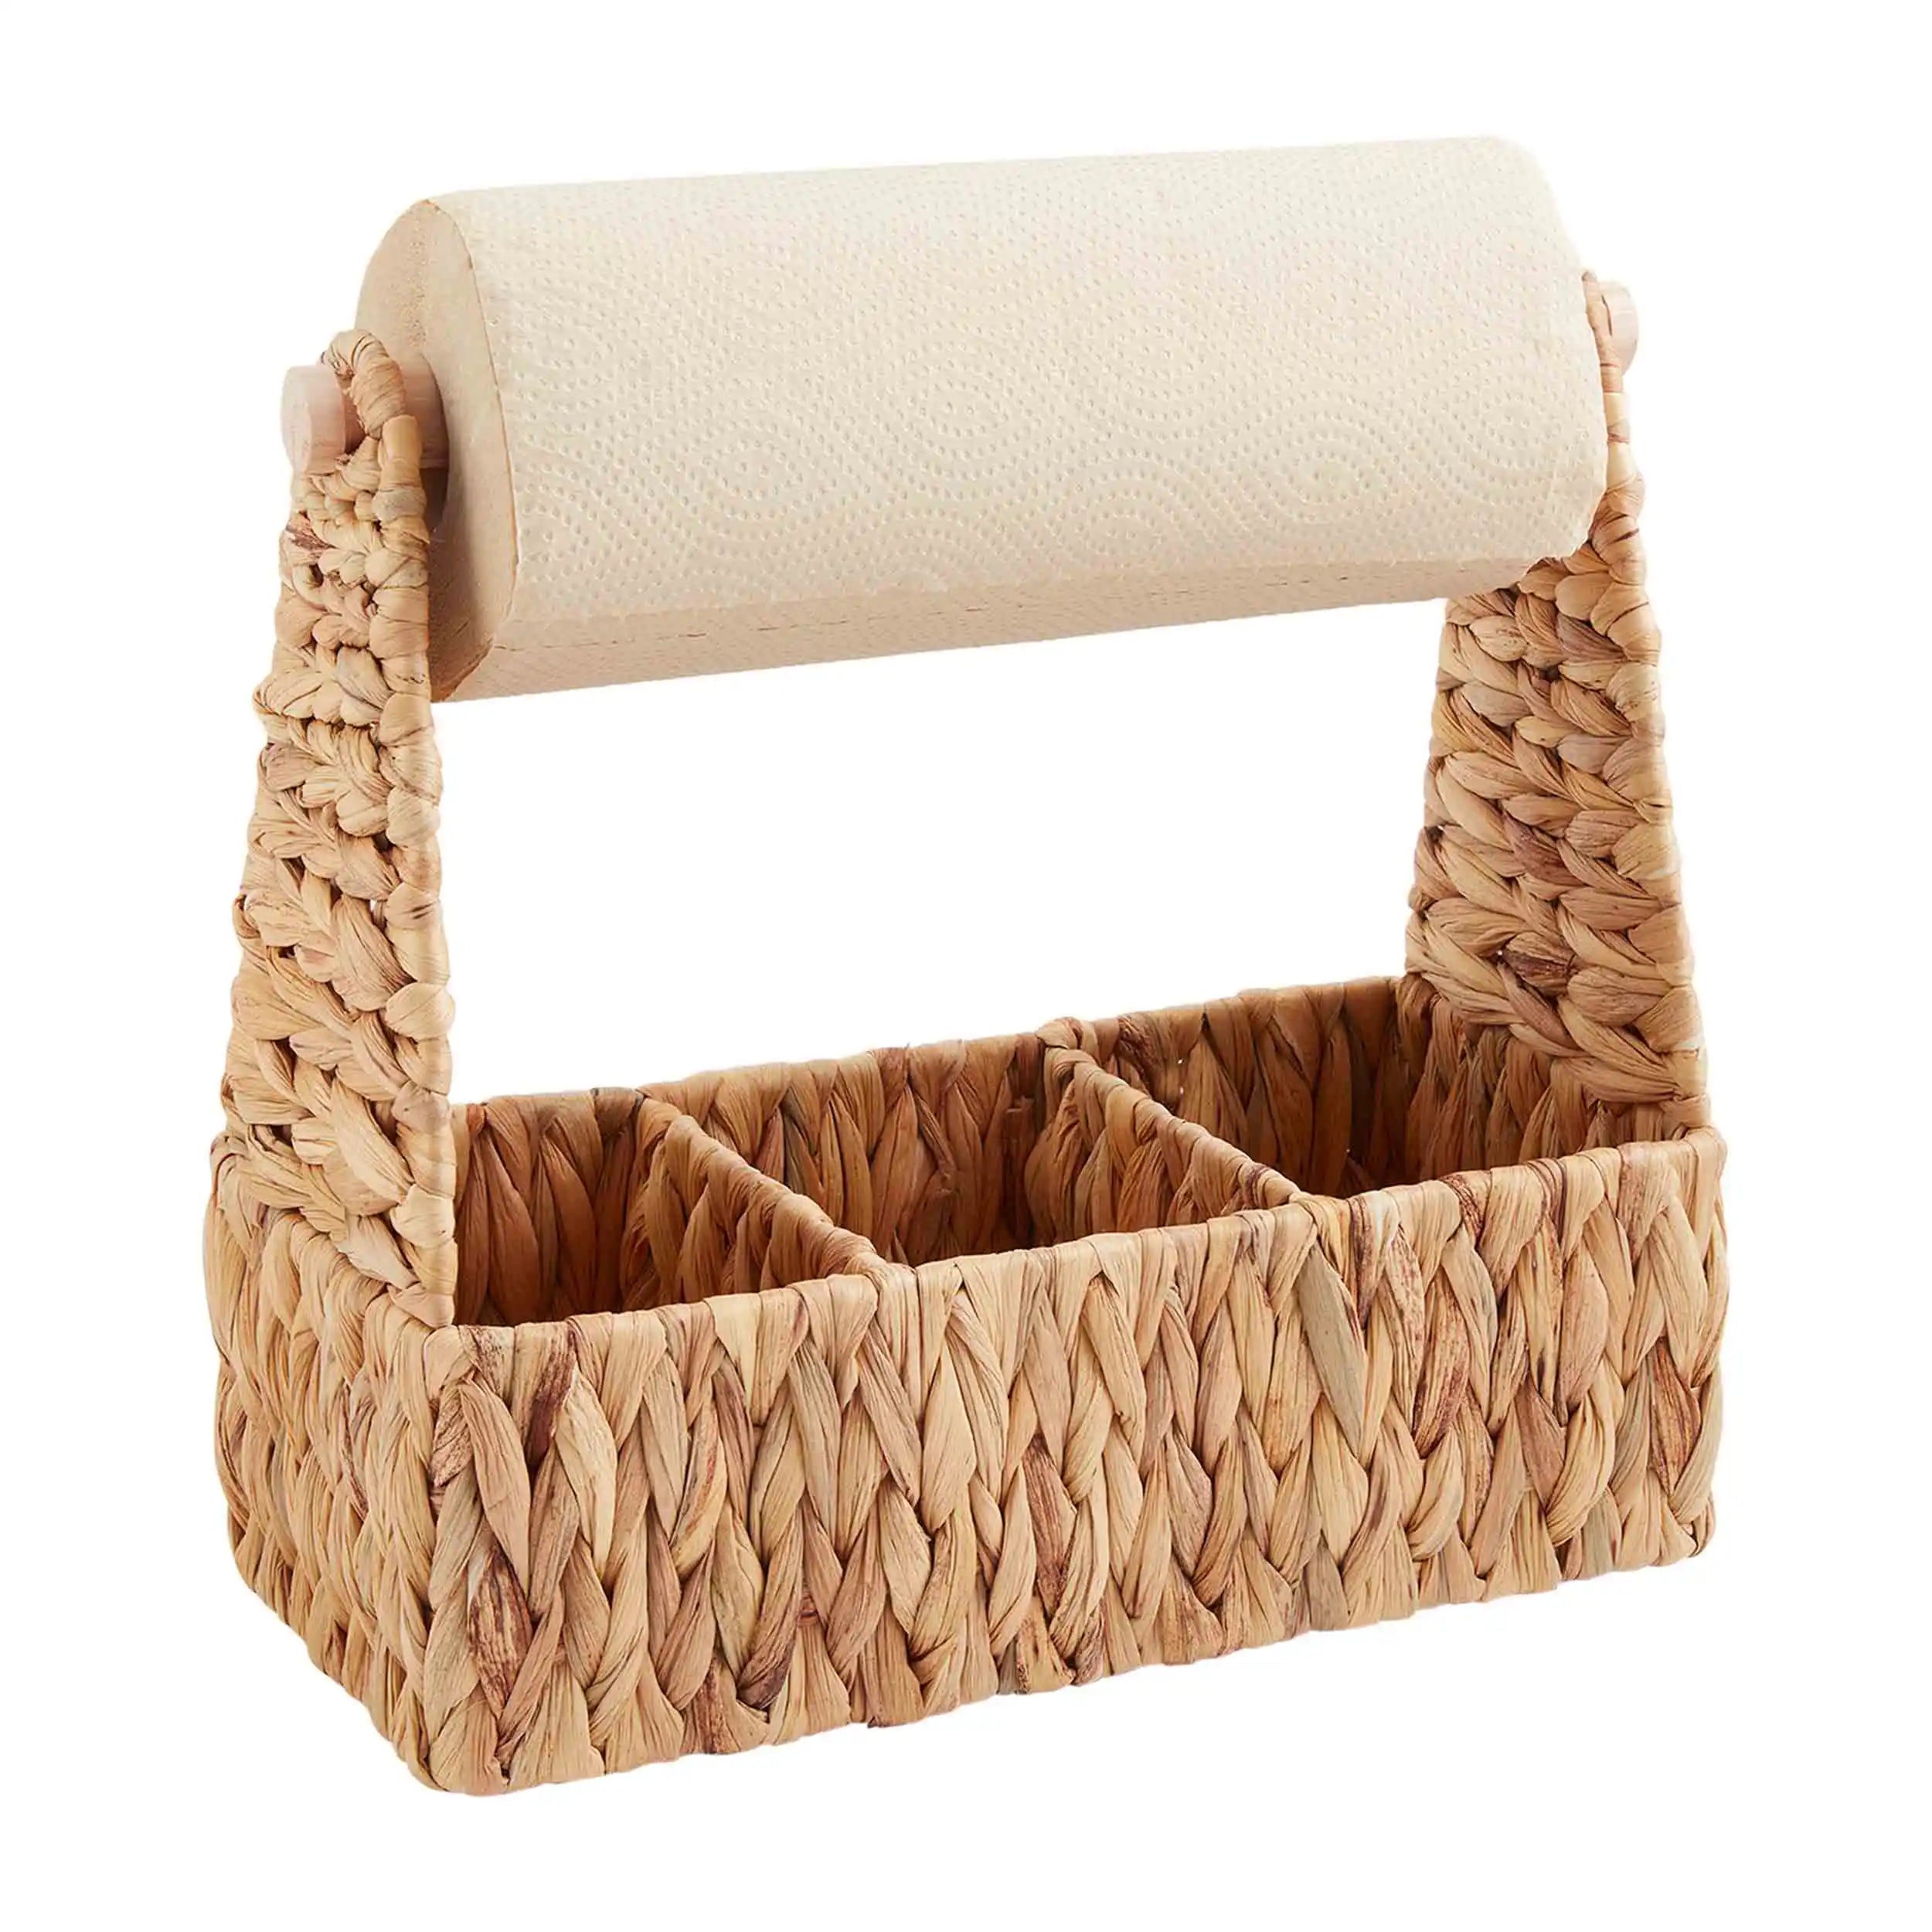 A Woven Utensil/Towel Caddy from Mud PIe.